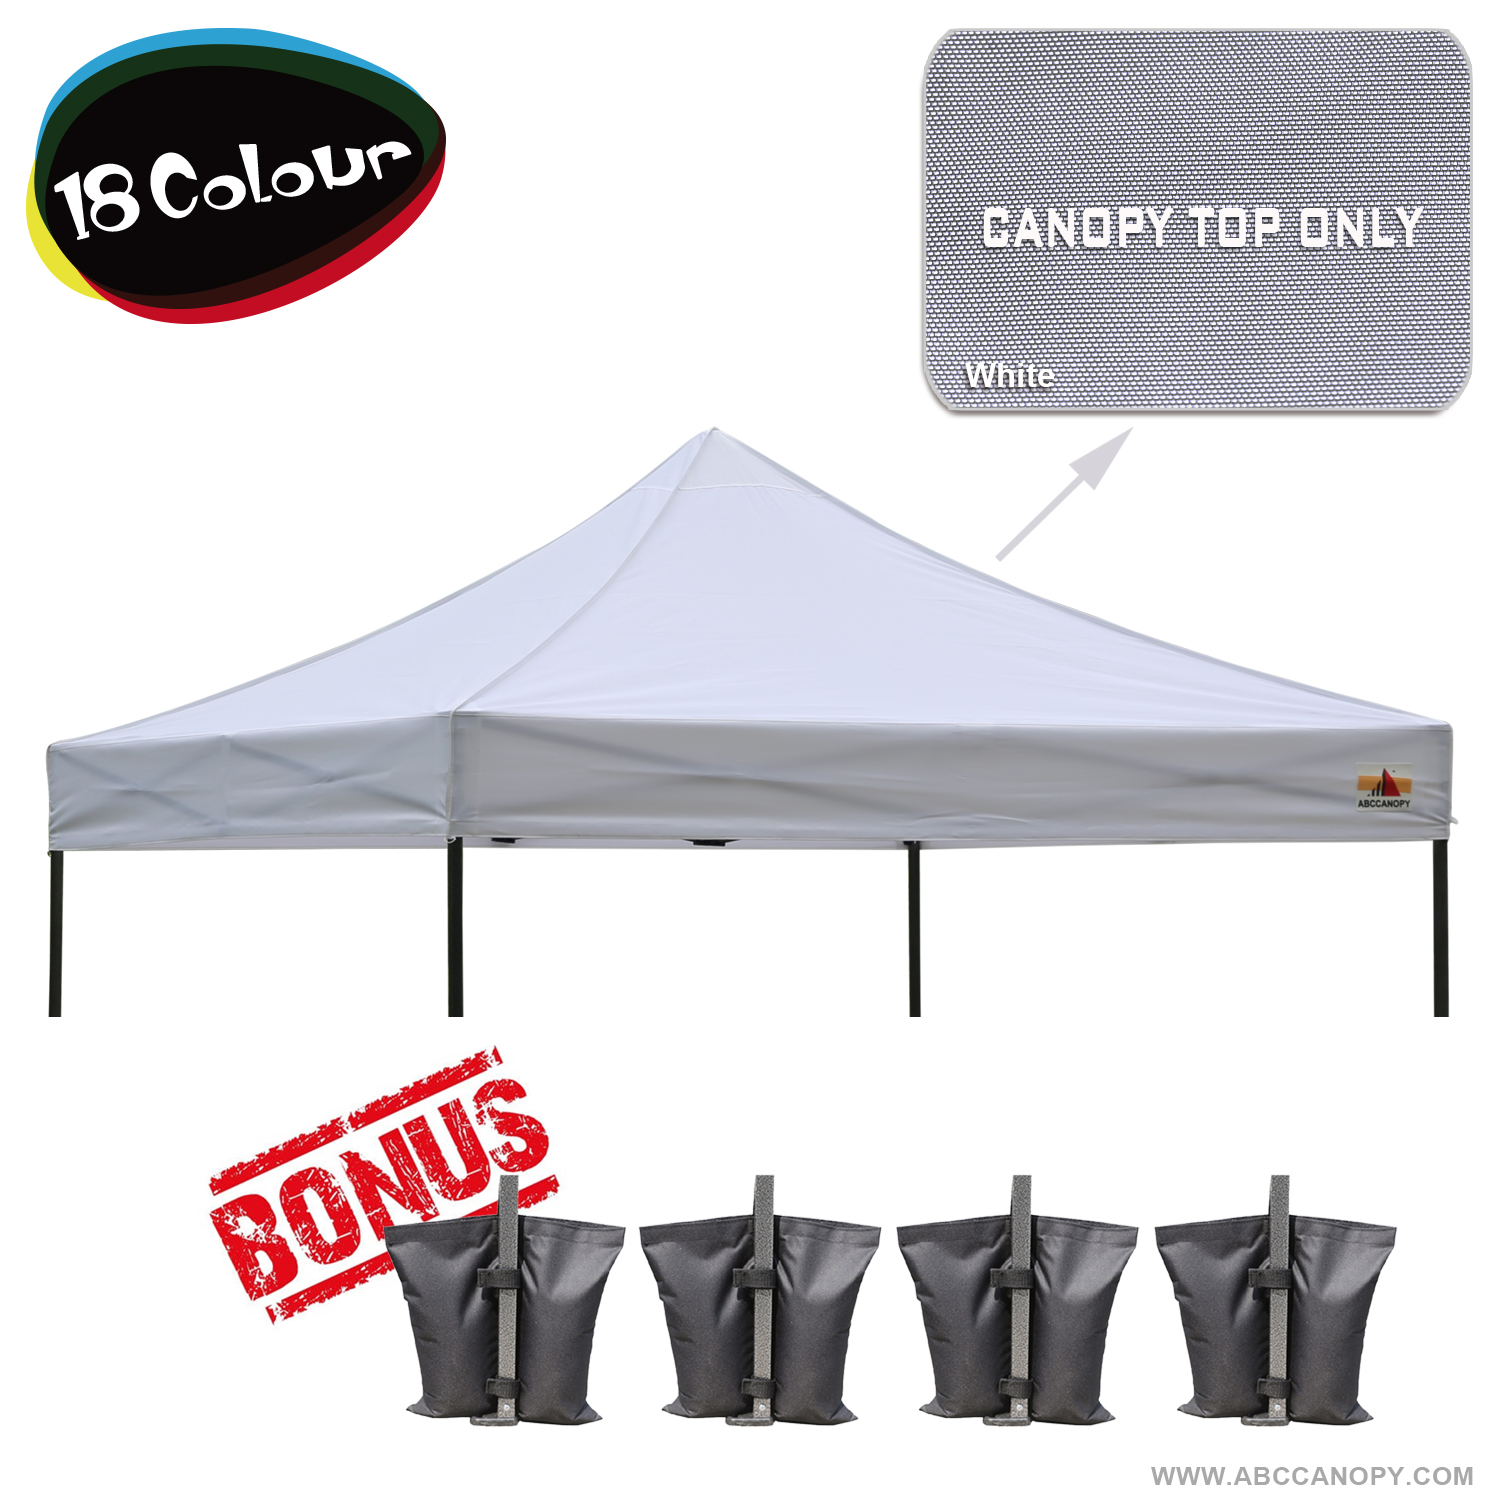 AbcCanopy 3MX3M Pop Up Canopy Replacement Top 100 Waterproof Come